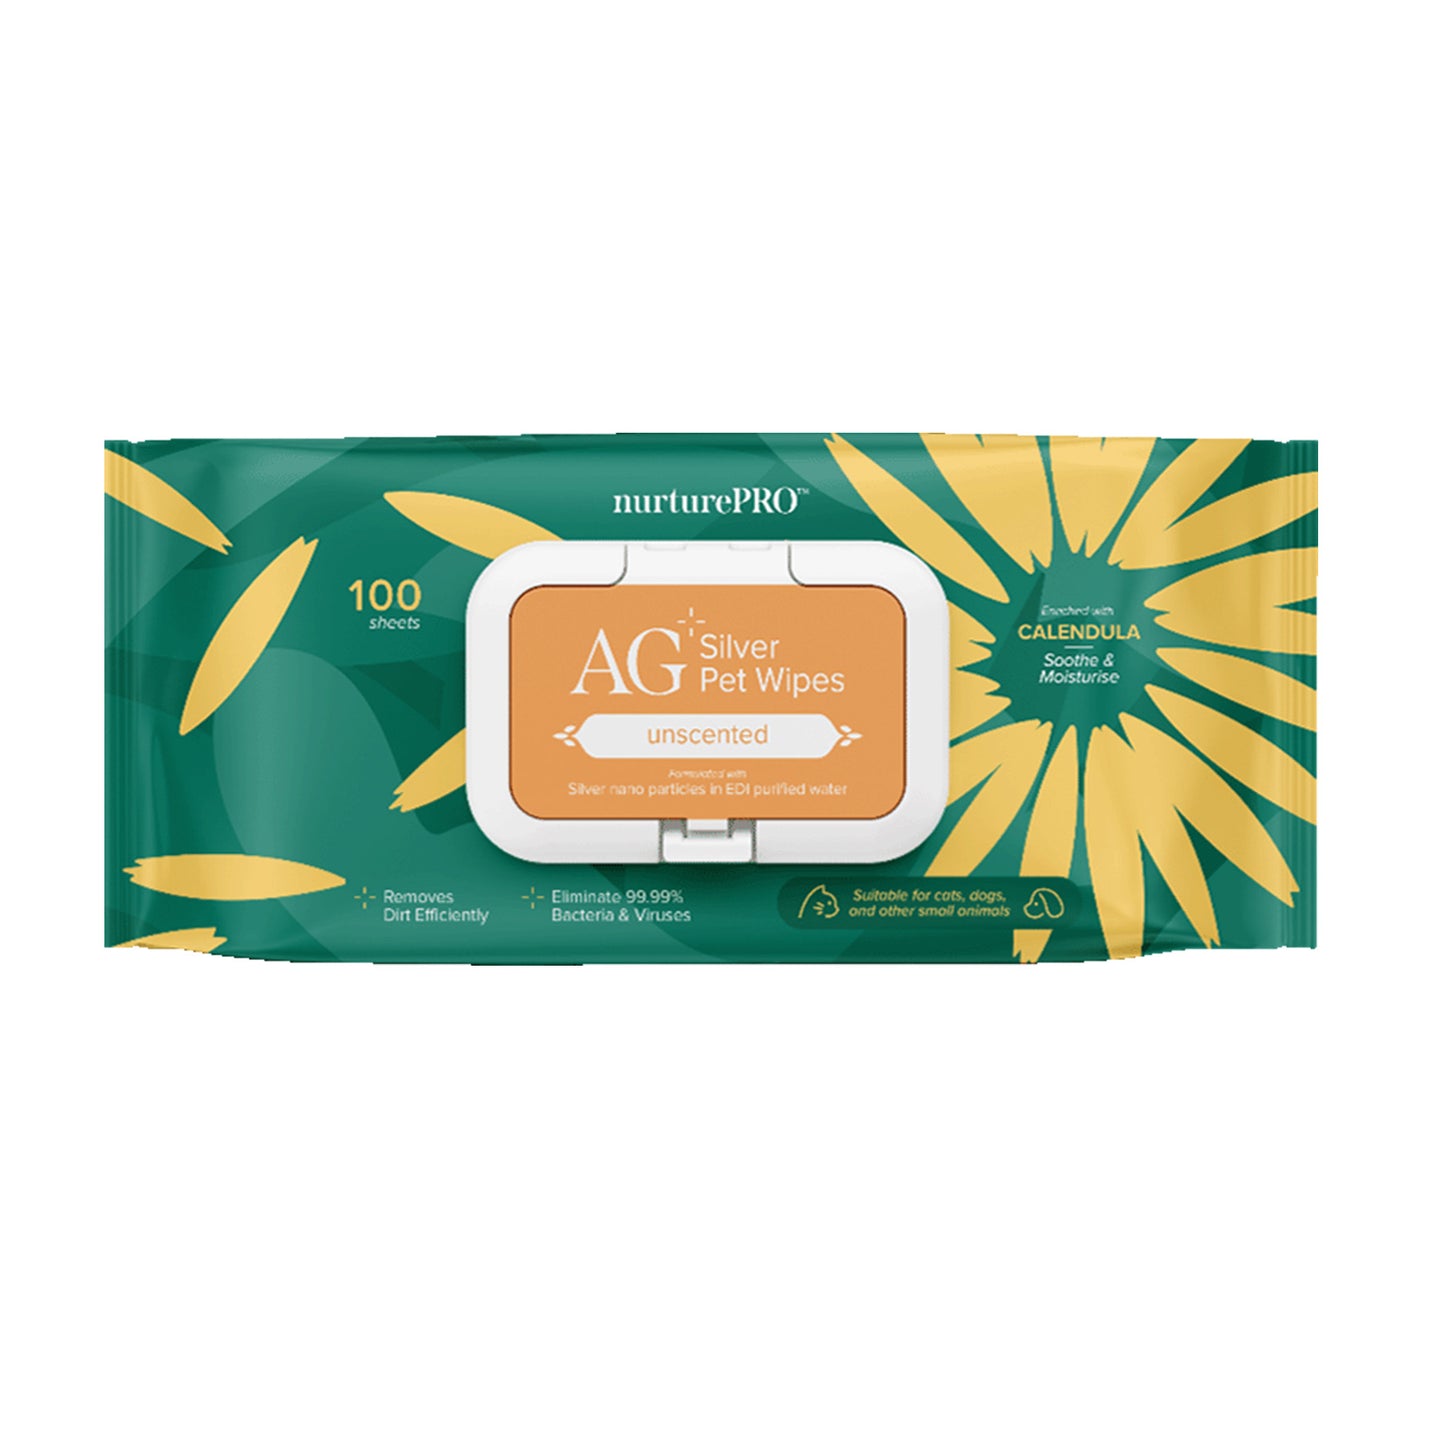 [As Low As $4.50 Each + FREE Dental Chew] Nurture Pro AG+ Silver Unscented Pet Wipes 100pcs